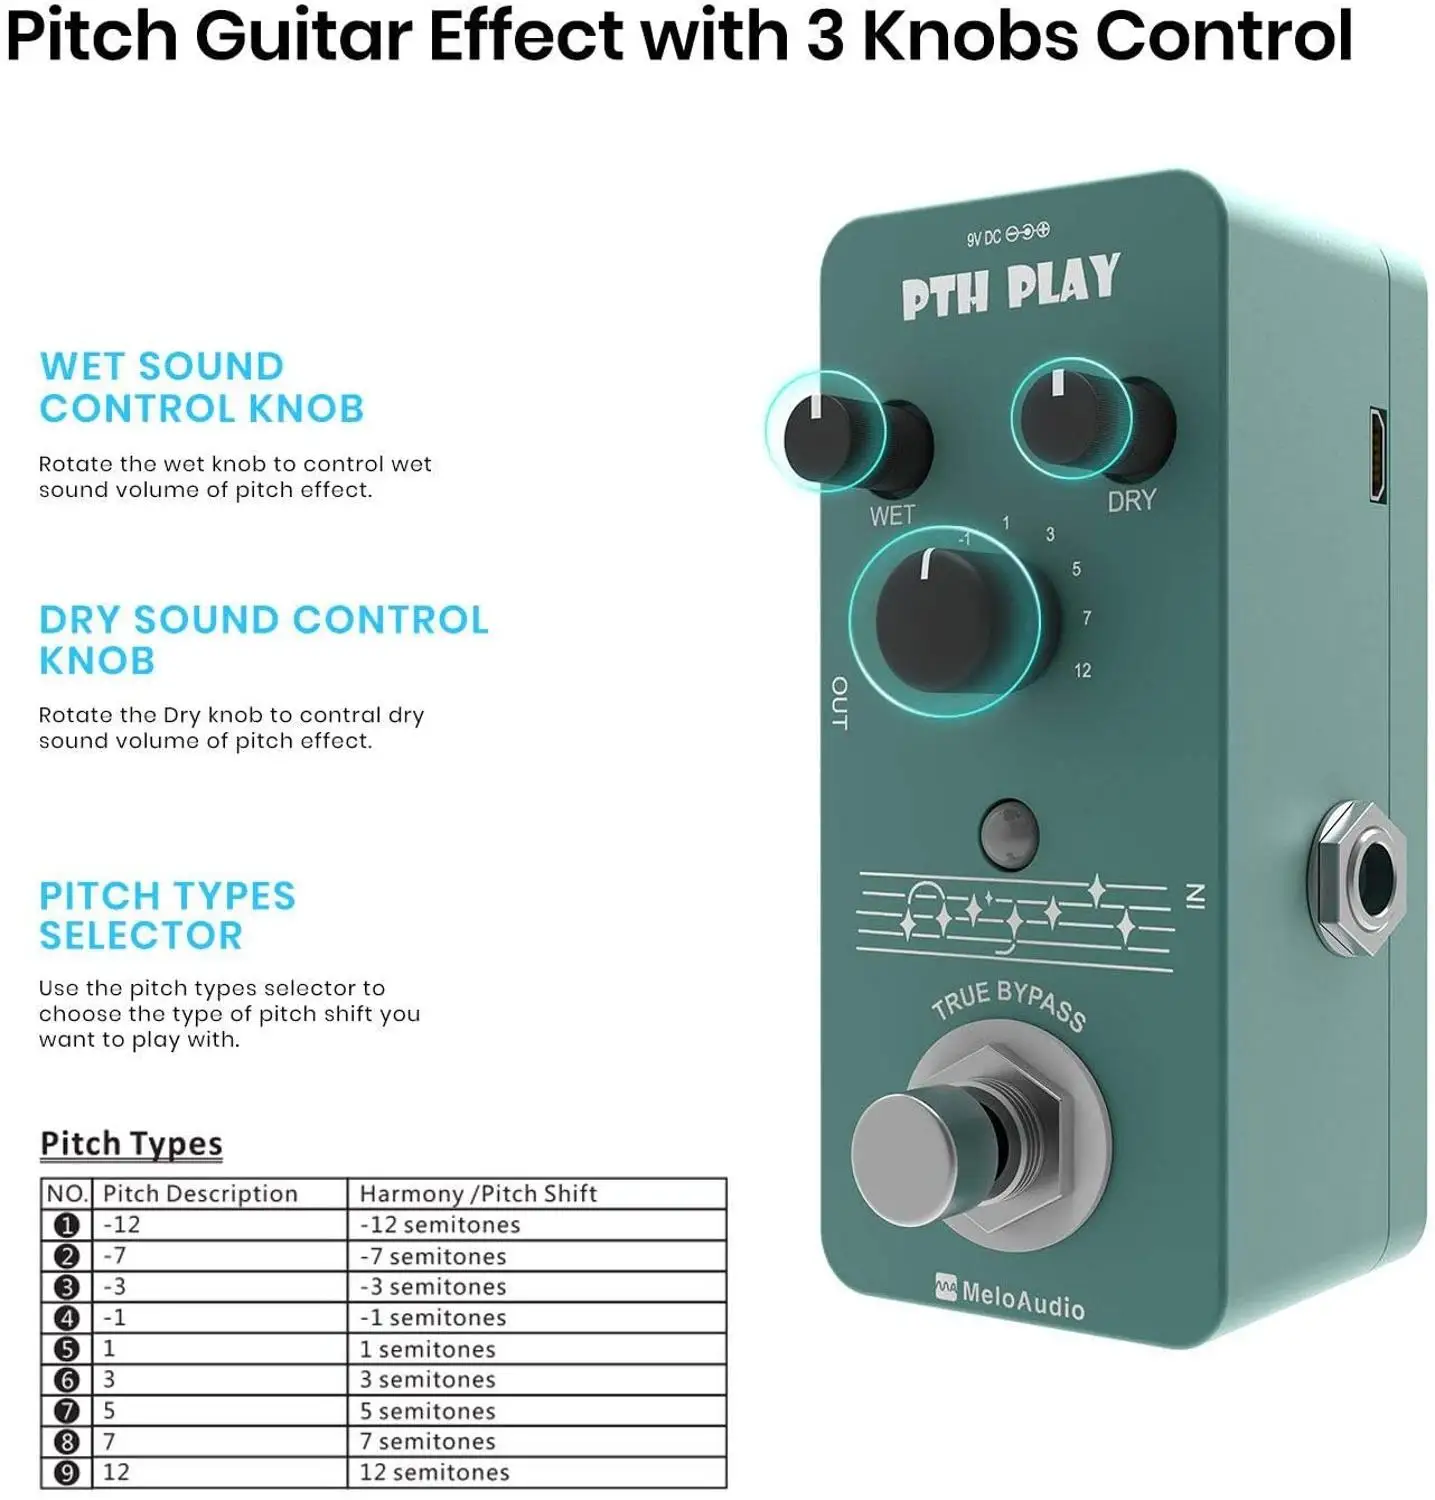 MeloAudio Tone Shifter Digital Pitch Pedal Guitar Effect Pedal with 9 Pitch Types True Bypass enlarge